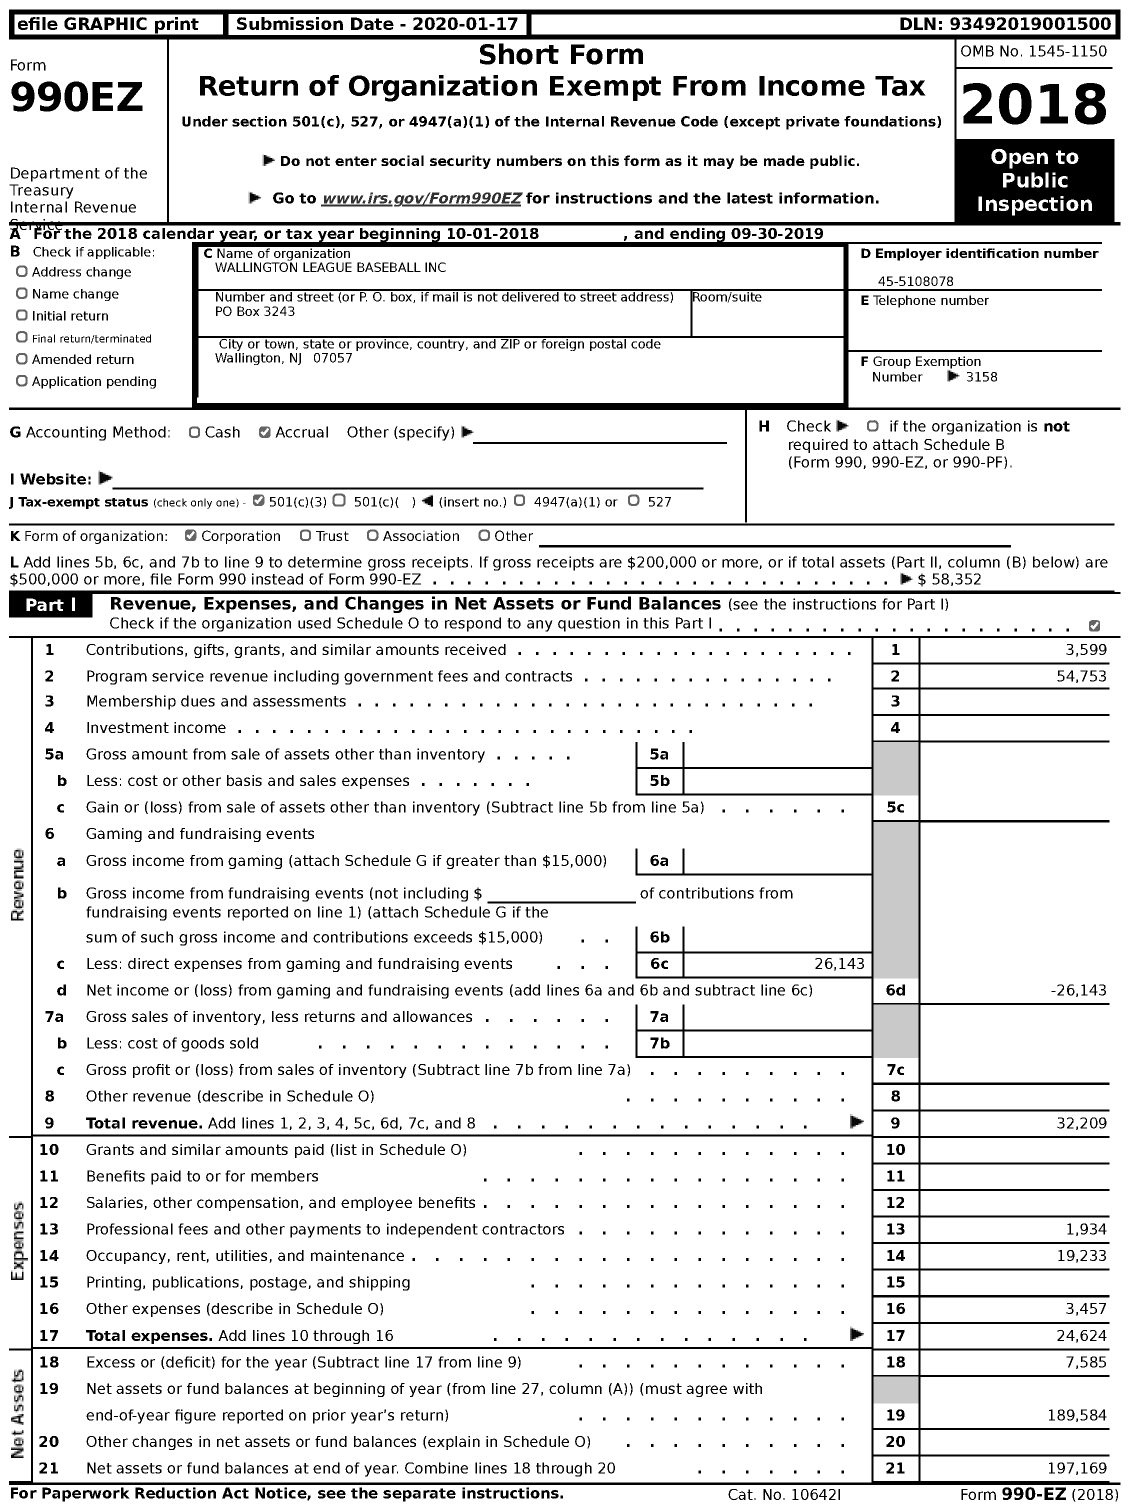 Image of first page of 2018 Form 990EZ for Little League Baseball - 2300517 Wallington LL